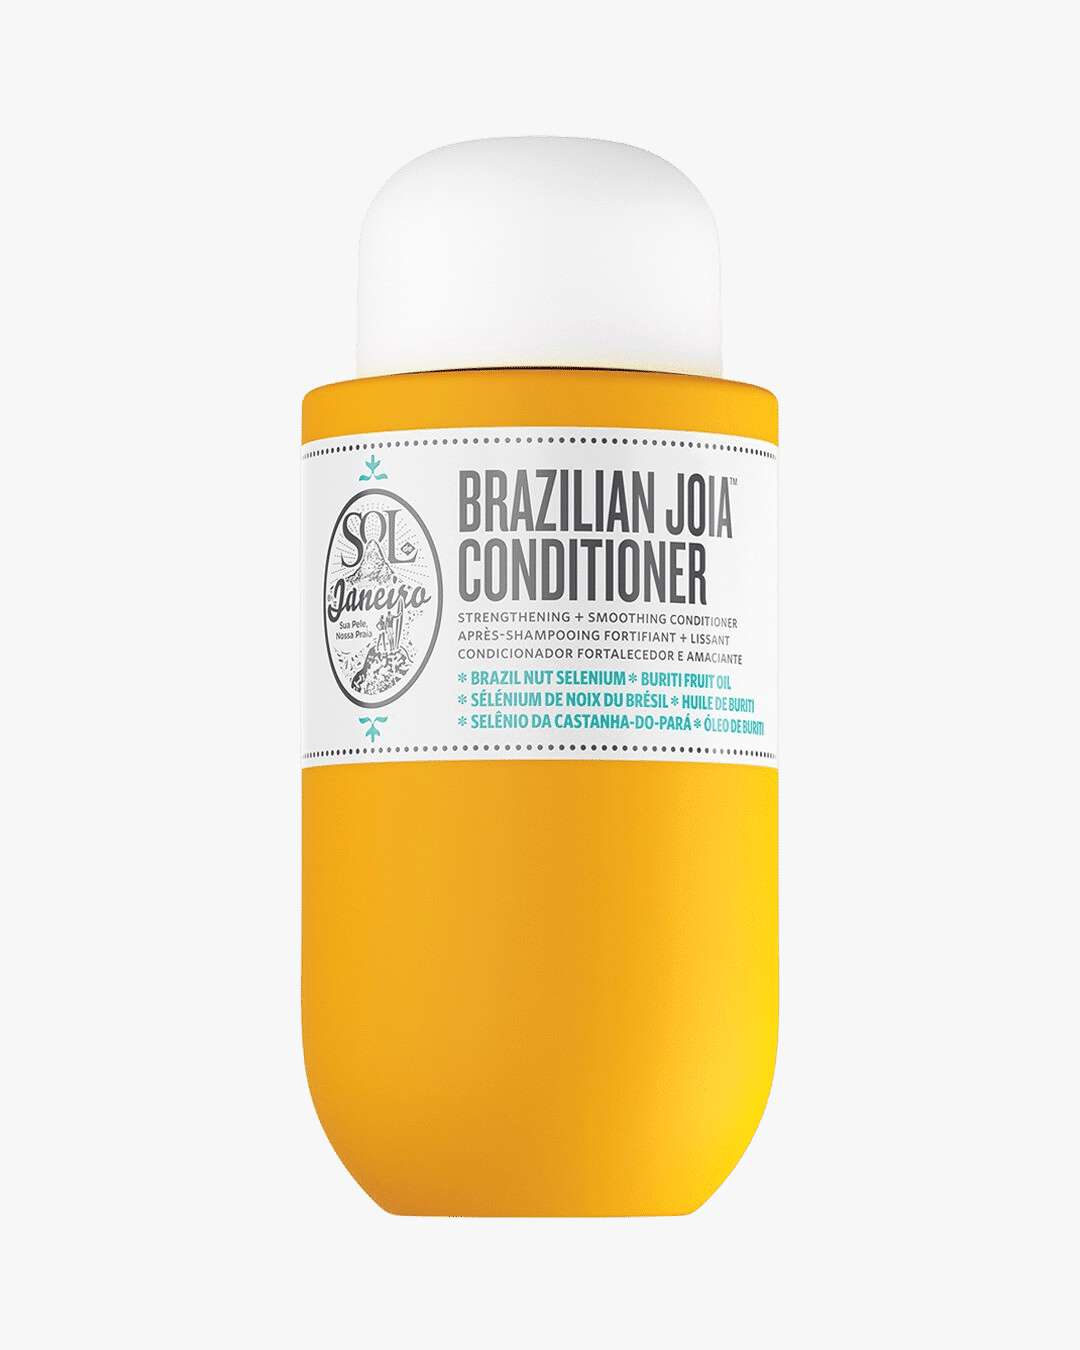 Brazilian Joia Strengthening + Smoothing Conditioner 296 ml